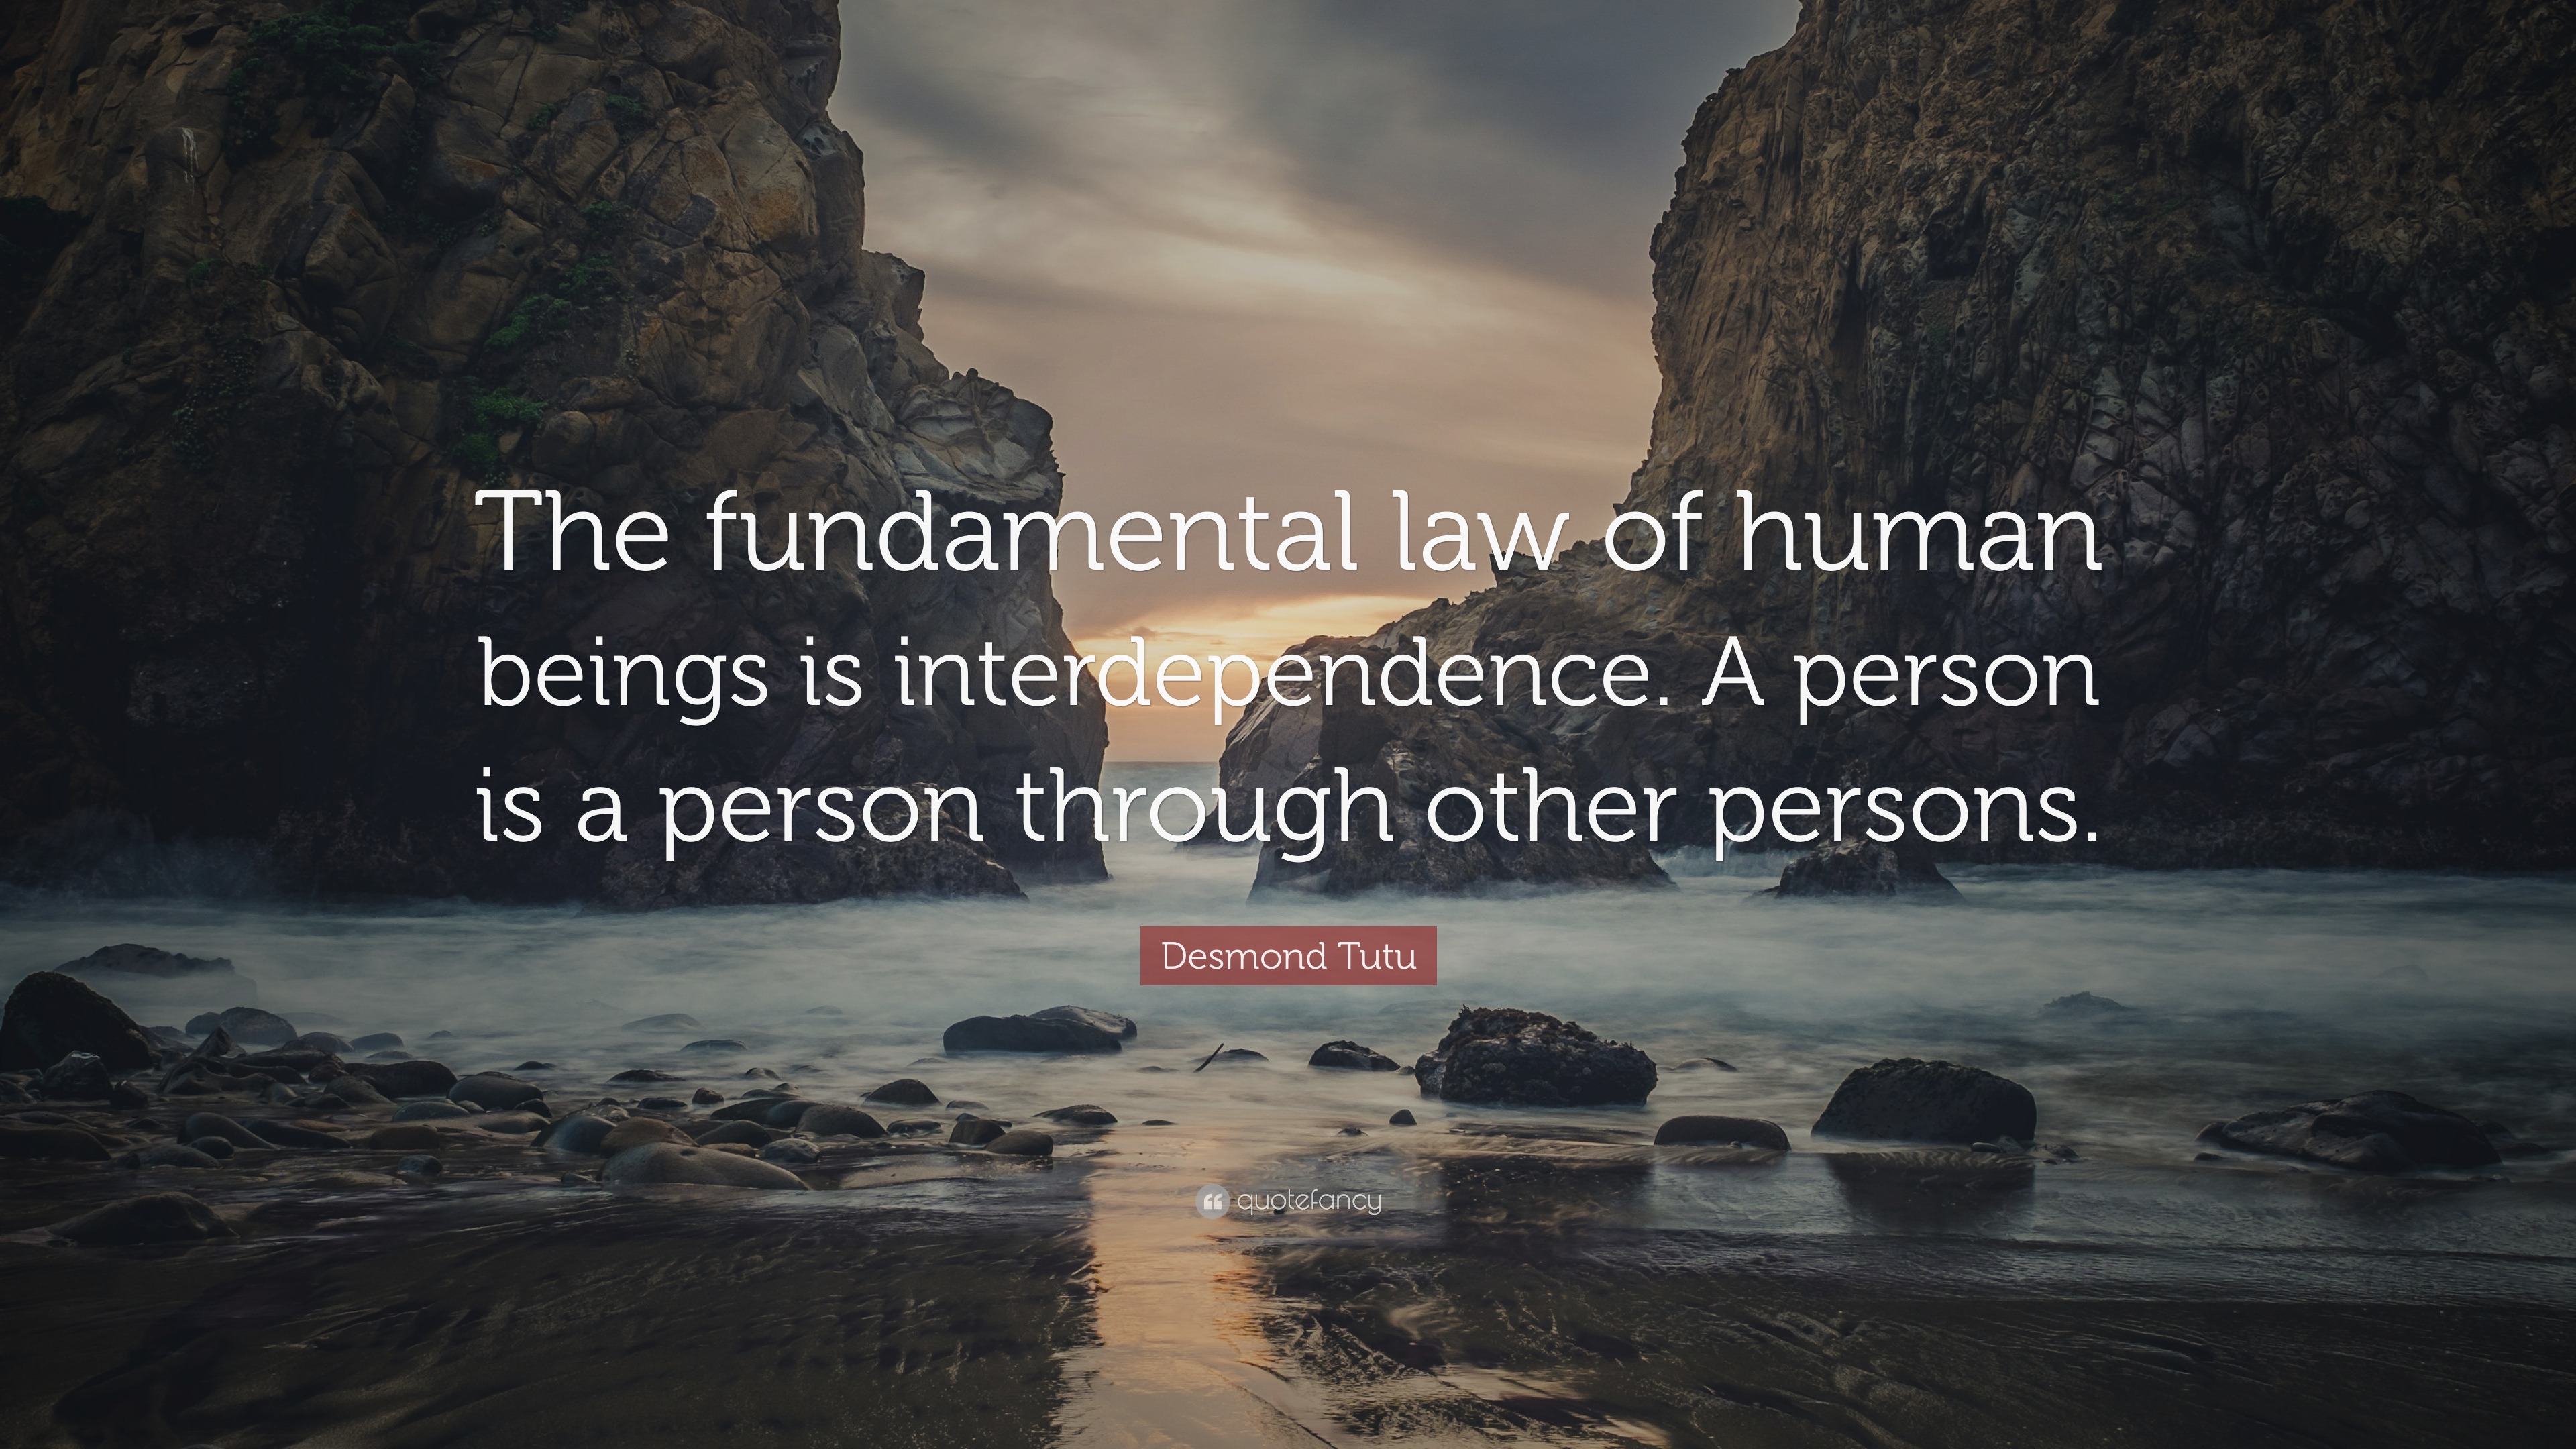 Desmond Tutu Quote: "The fundamental law of human beings ...